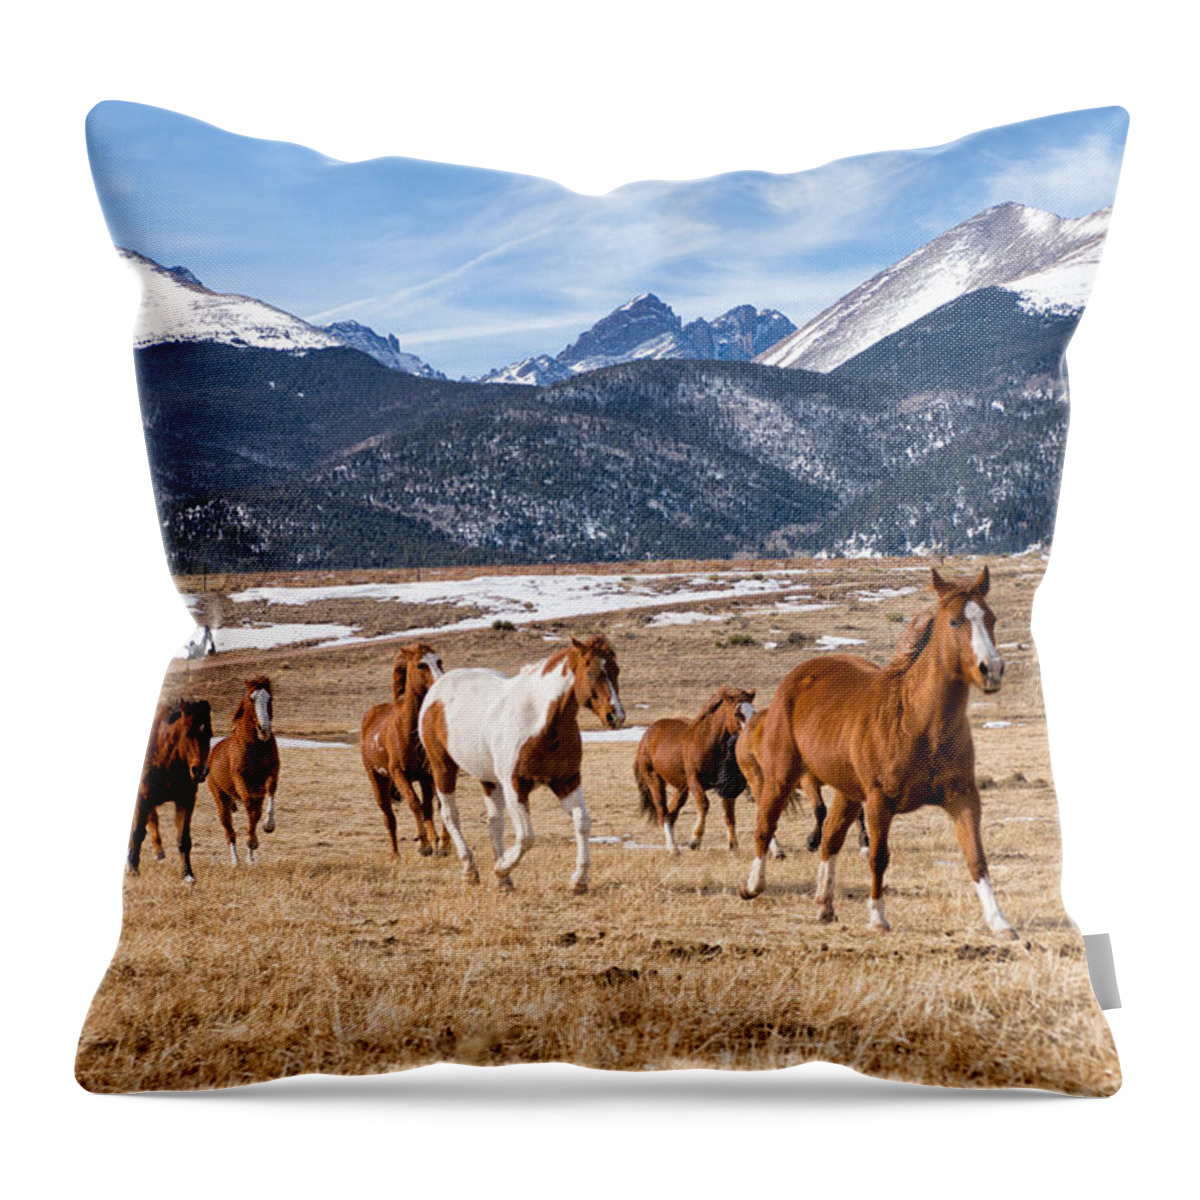 Colorado Throw Pillow featuring the photograph Running Free by Elin Skov Vaeth